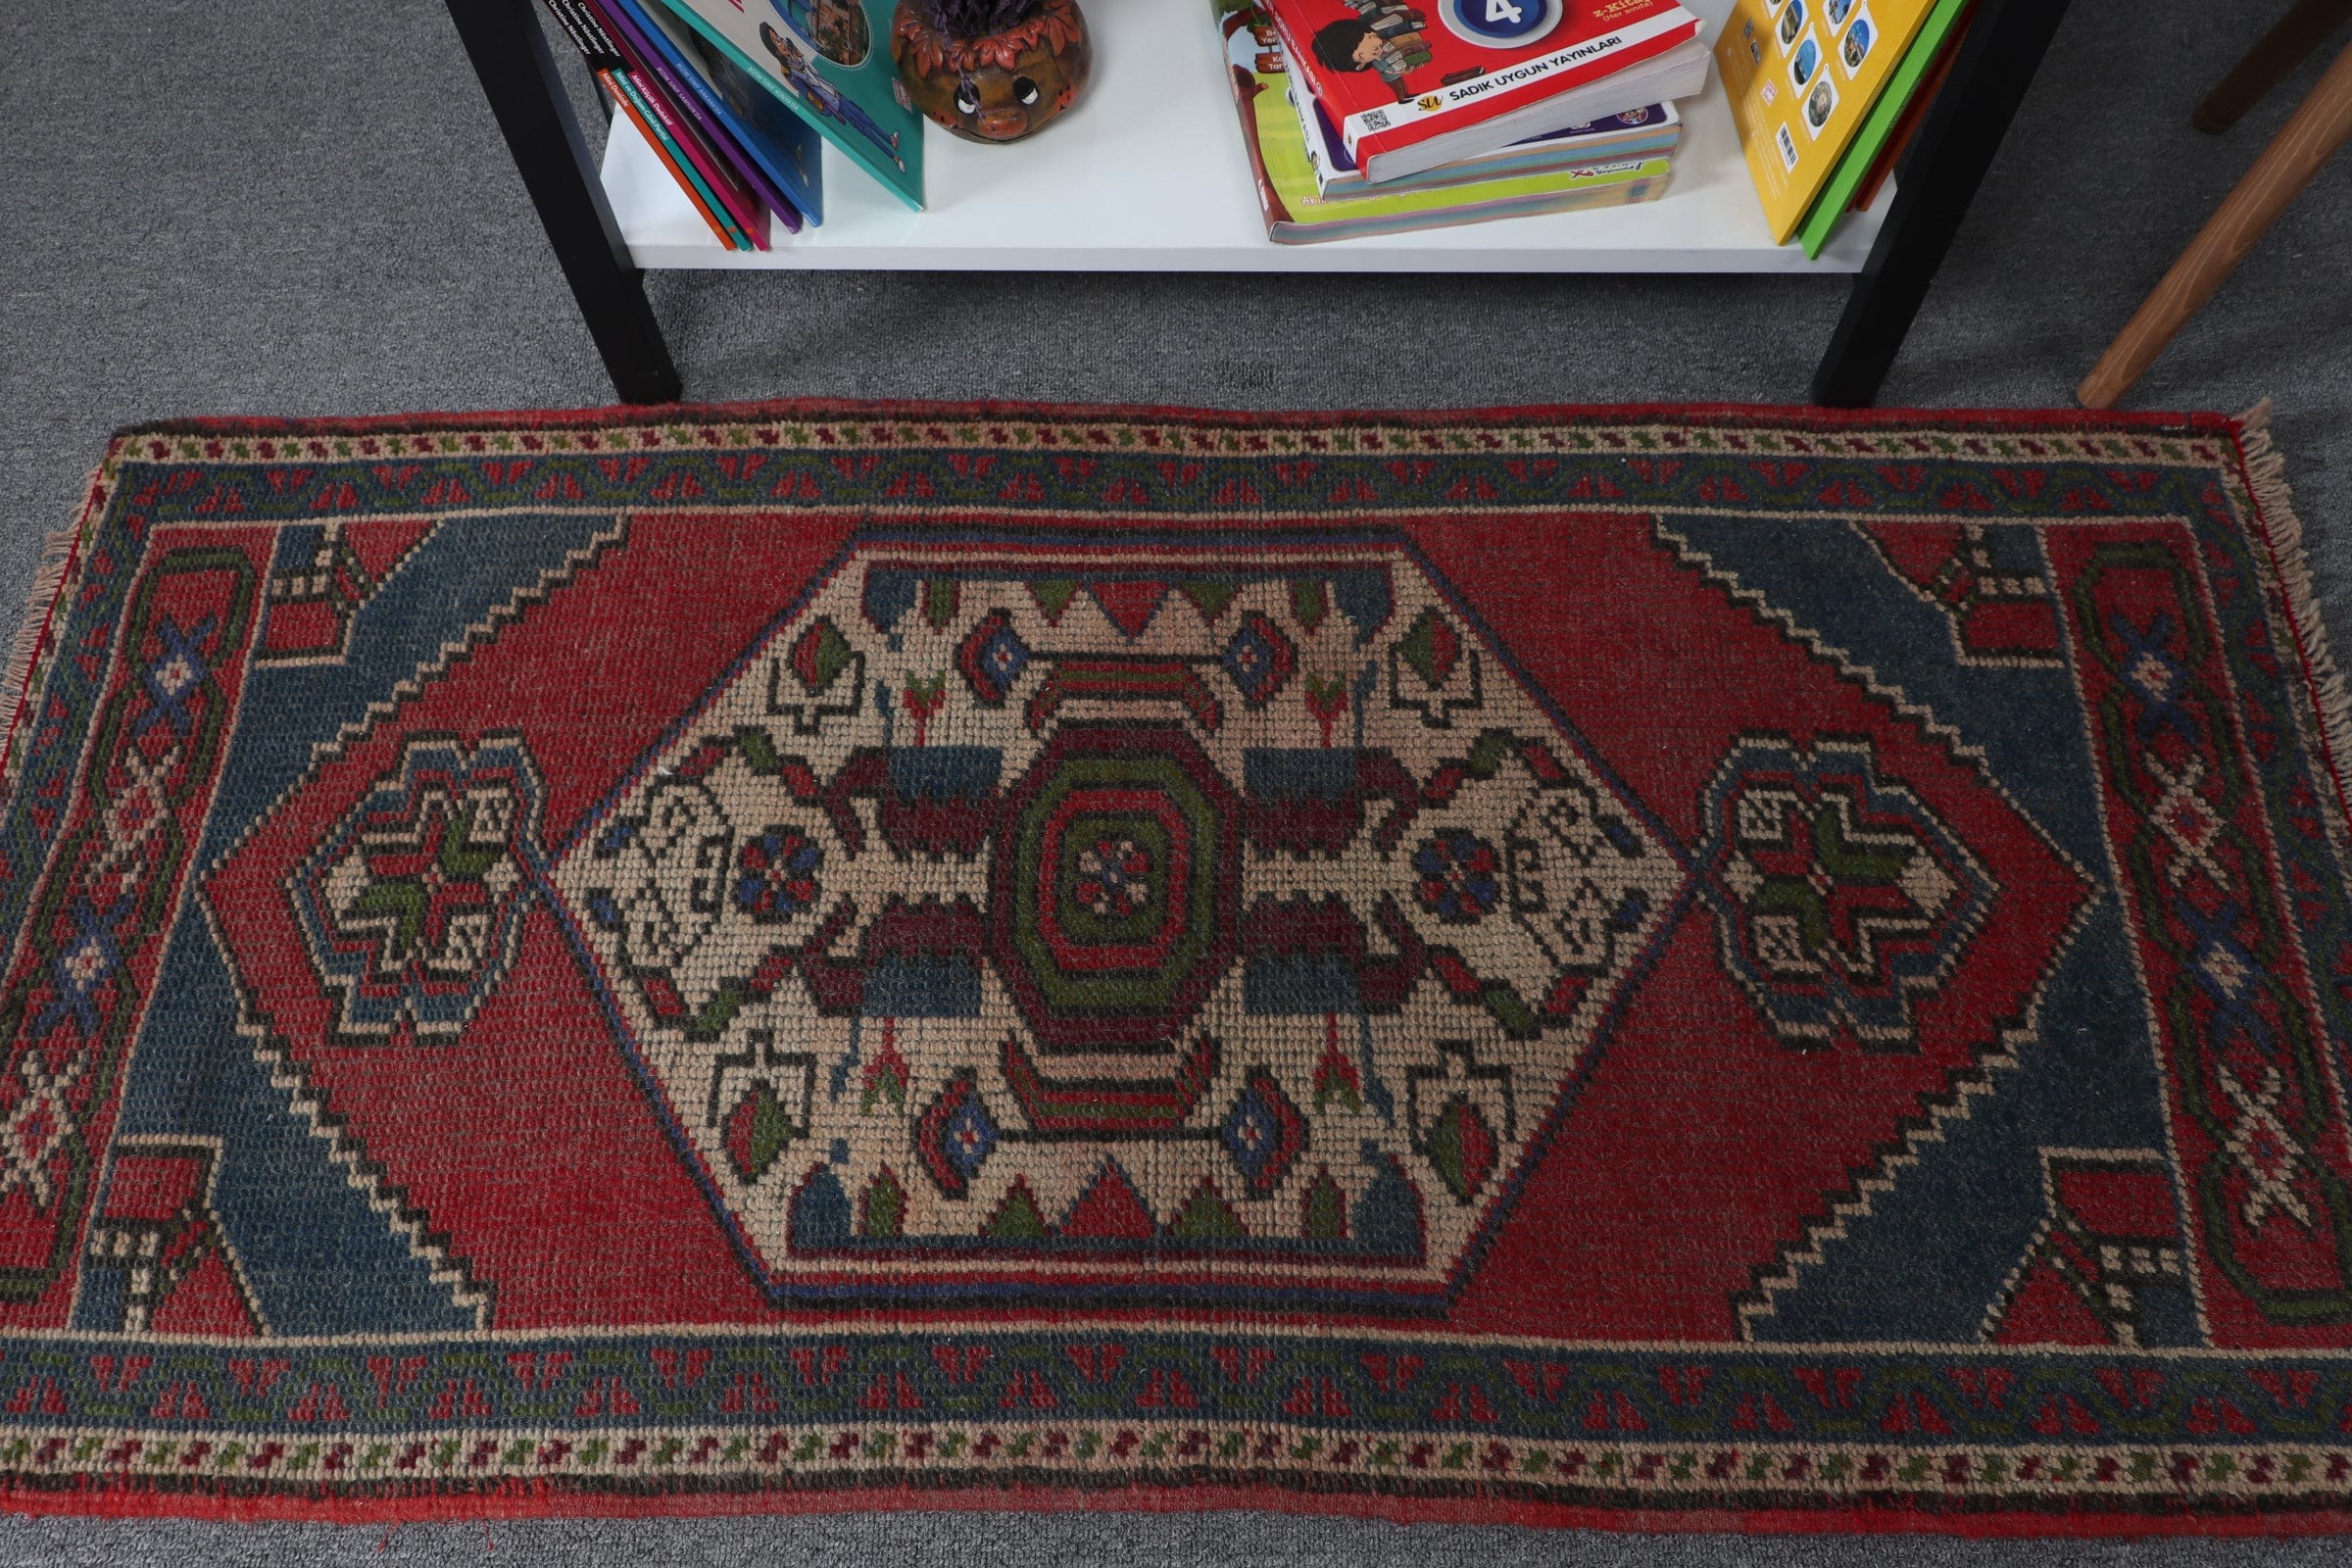 Red Anatolian Rug, Car Mat Rug, Cool Rugs, Vintage Rug, Rugs for Nursery, Turkish Rugs, Entry Rug, 2x3.9 ft Small Rug, Oriental Rugs